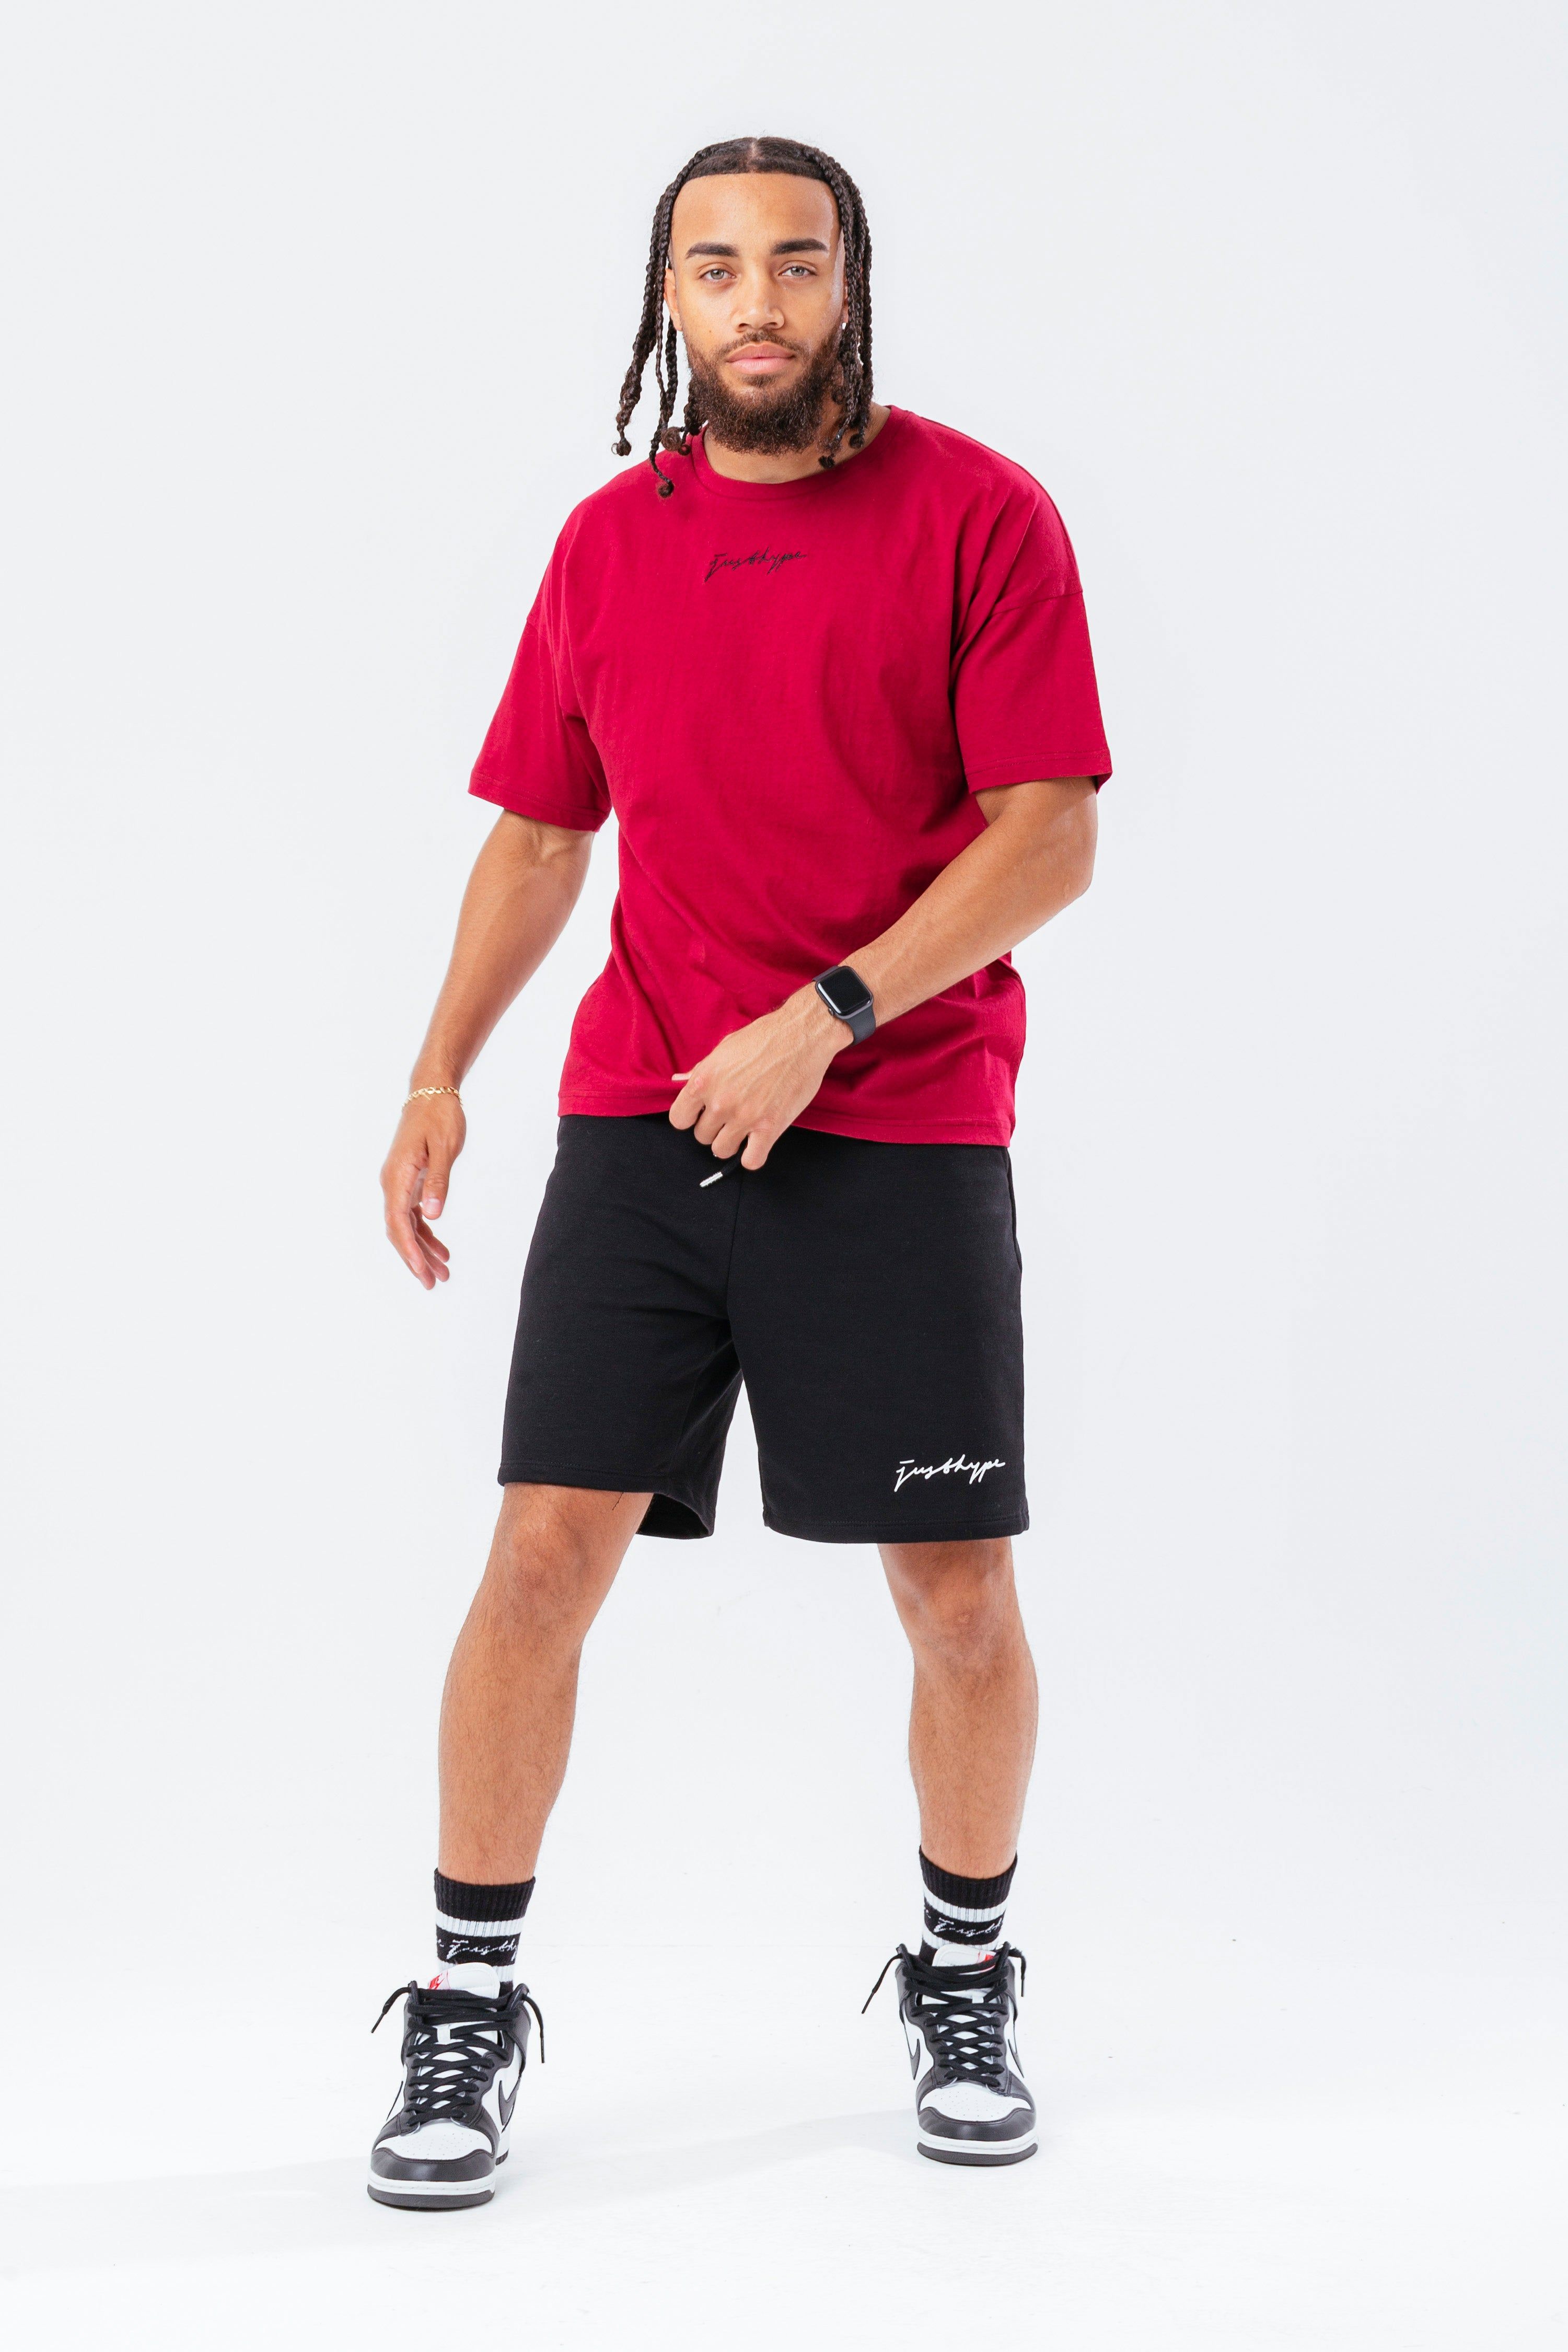 Make the most of your spending and stock up on our Men's 3-pack oversized t-shirts. Each tee is designed with a soft-touch fabric base for the ultimate comfort and breathable fabric. Highlighting an oversized shape, crew neckline and enlarged sleeves for a trending fit. Your everyday tees just got simpler. The model wears a size M. Machine washable.